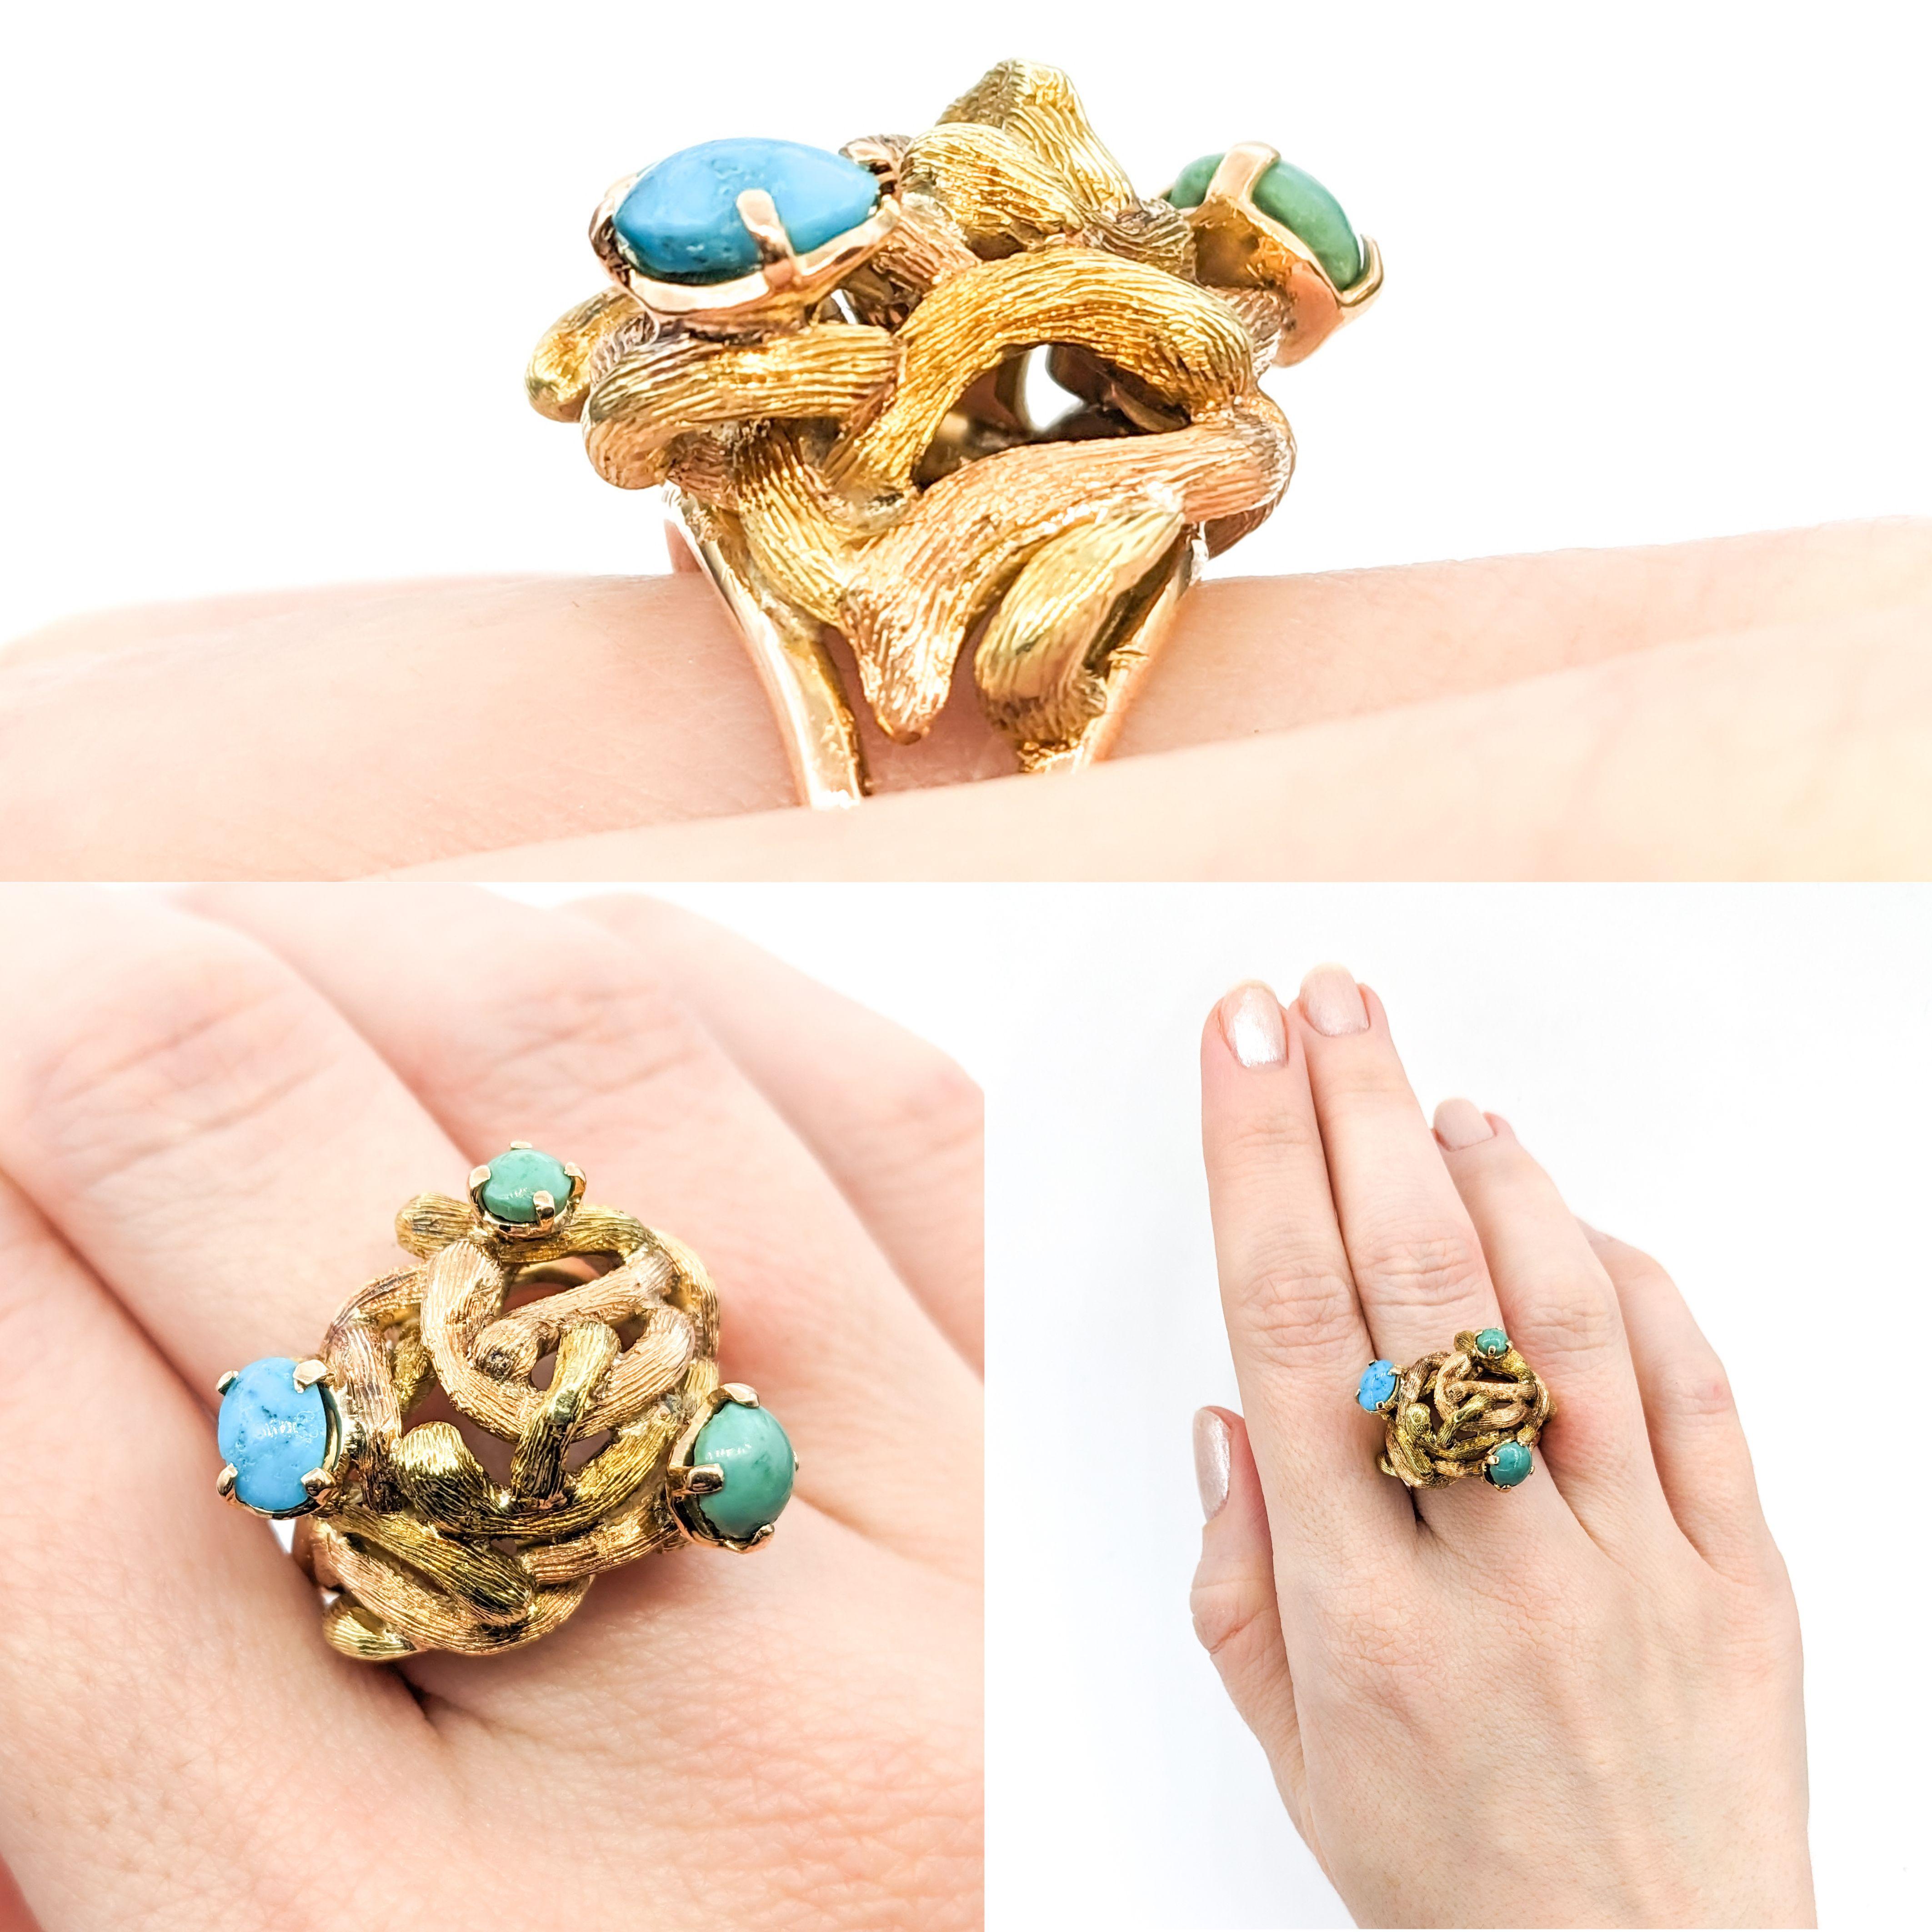 Turquoise Vintage Ring In Yellow Gold

Presenting a stunning Vintage Ring, meticulously handcrafted in 18kt gold. This unique piece showcases a striking combination of a 6mm round and a 4mm oval Turquoise centerpiece, beautifully embedded within a